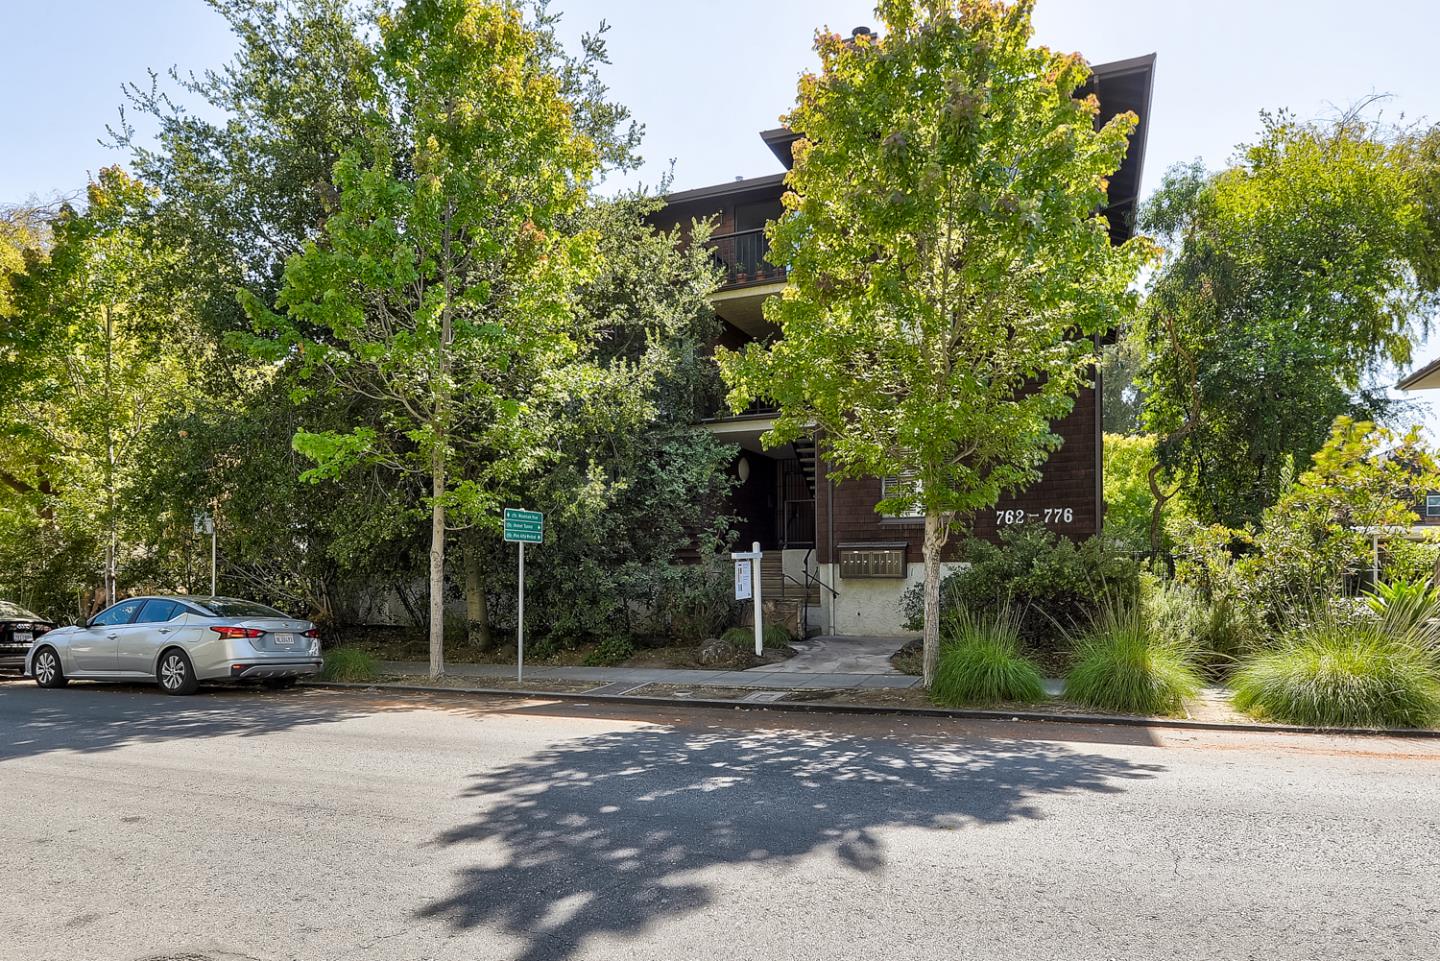 This chic and inviting downtown Palo Alto condo has it all! While situated on a charming treelined peaceful street, the thriving urban vibe of University Avenue is 2 blocks away. This spacious condo was previously a 2 bedroom, 2 bathroom abode and now offers 1 large primary suite along with a second full bathroom. The space offers potential for your personal vision and lifestyle. Sub-Zero, Bosch and Dacor appliances enhance the smartly updated kitchen. Stunning built in bookcases and shelving create a sophisticated and functional statement. Amenities include gorgeous hardwood floors, granite countertops, in-unit laundry, balcony, interior louvered shutters, replaced carpeting, secured underground garage with 2 dedicated parking spaces and storage. Close proximity to Heritage Park, Whole Foods, Caltrain and Top-rated Palo Alto Schools. Perfect for the first-time homebuyer or downsizer looking for a home that offers the quintessential central Palo Alto experience.